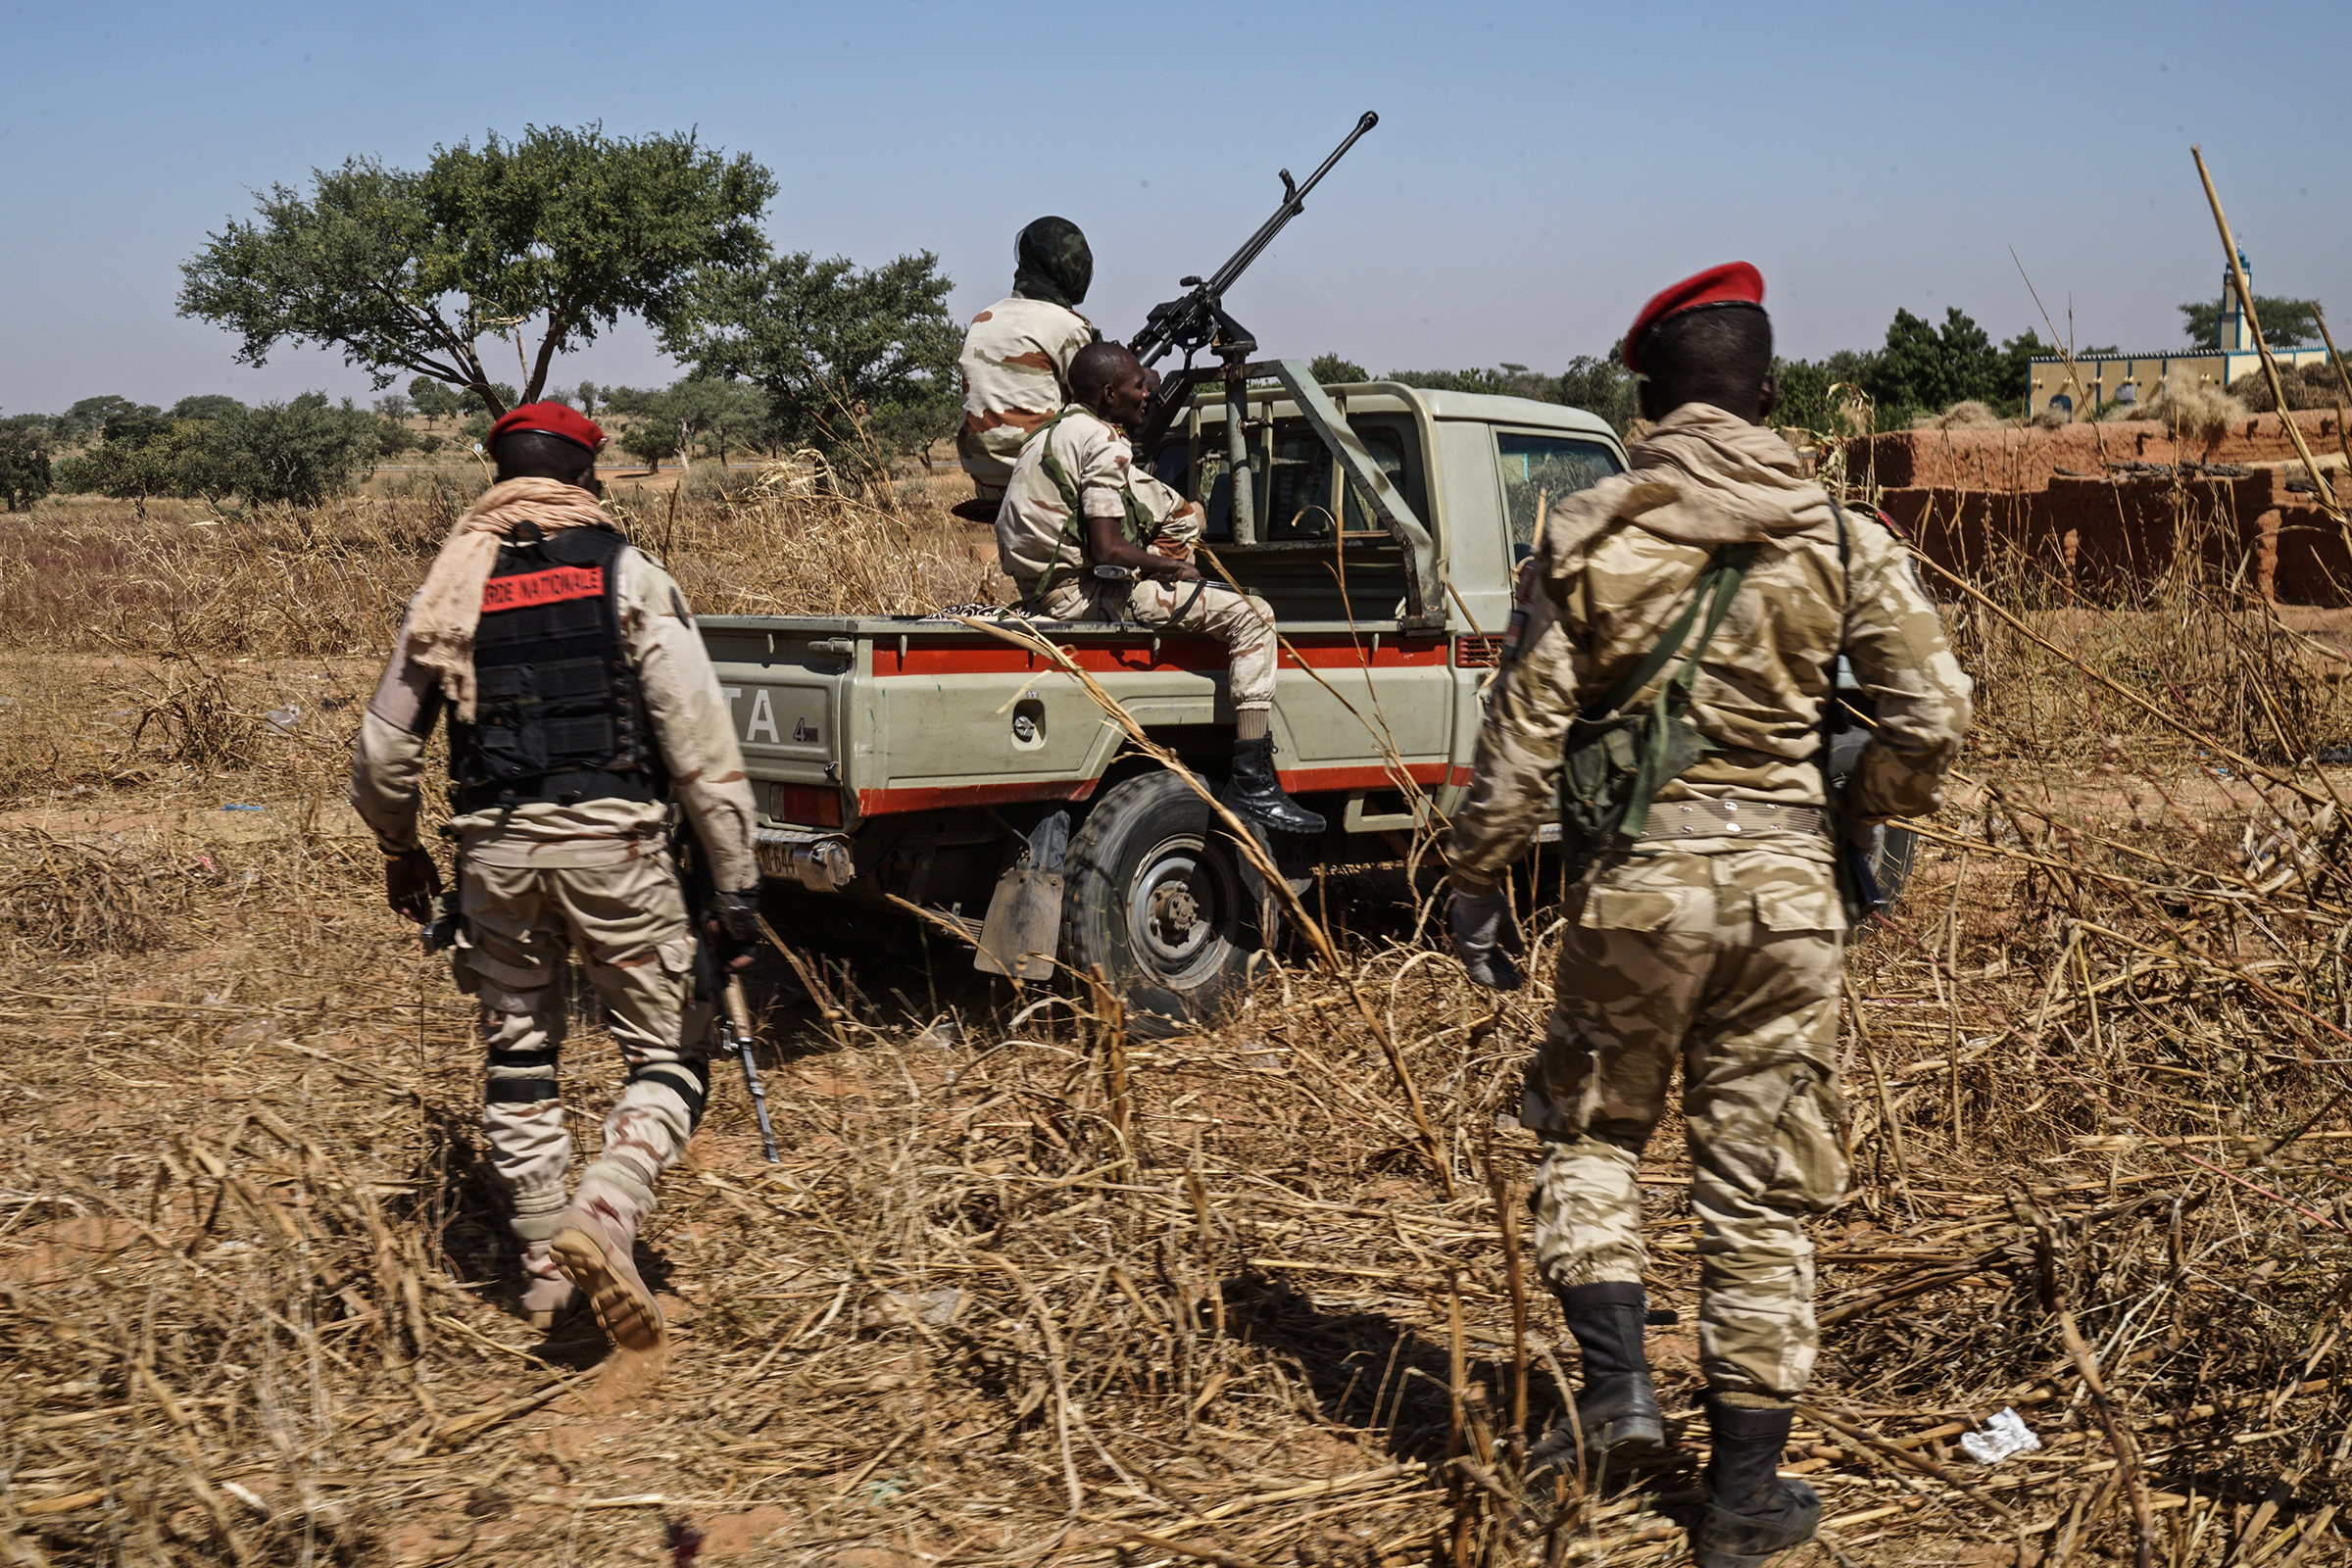 Nigerien Army troops on patrol in southern Niger, close to the Nigerian border. (Giles Clarke)